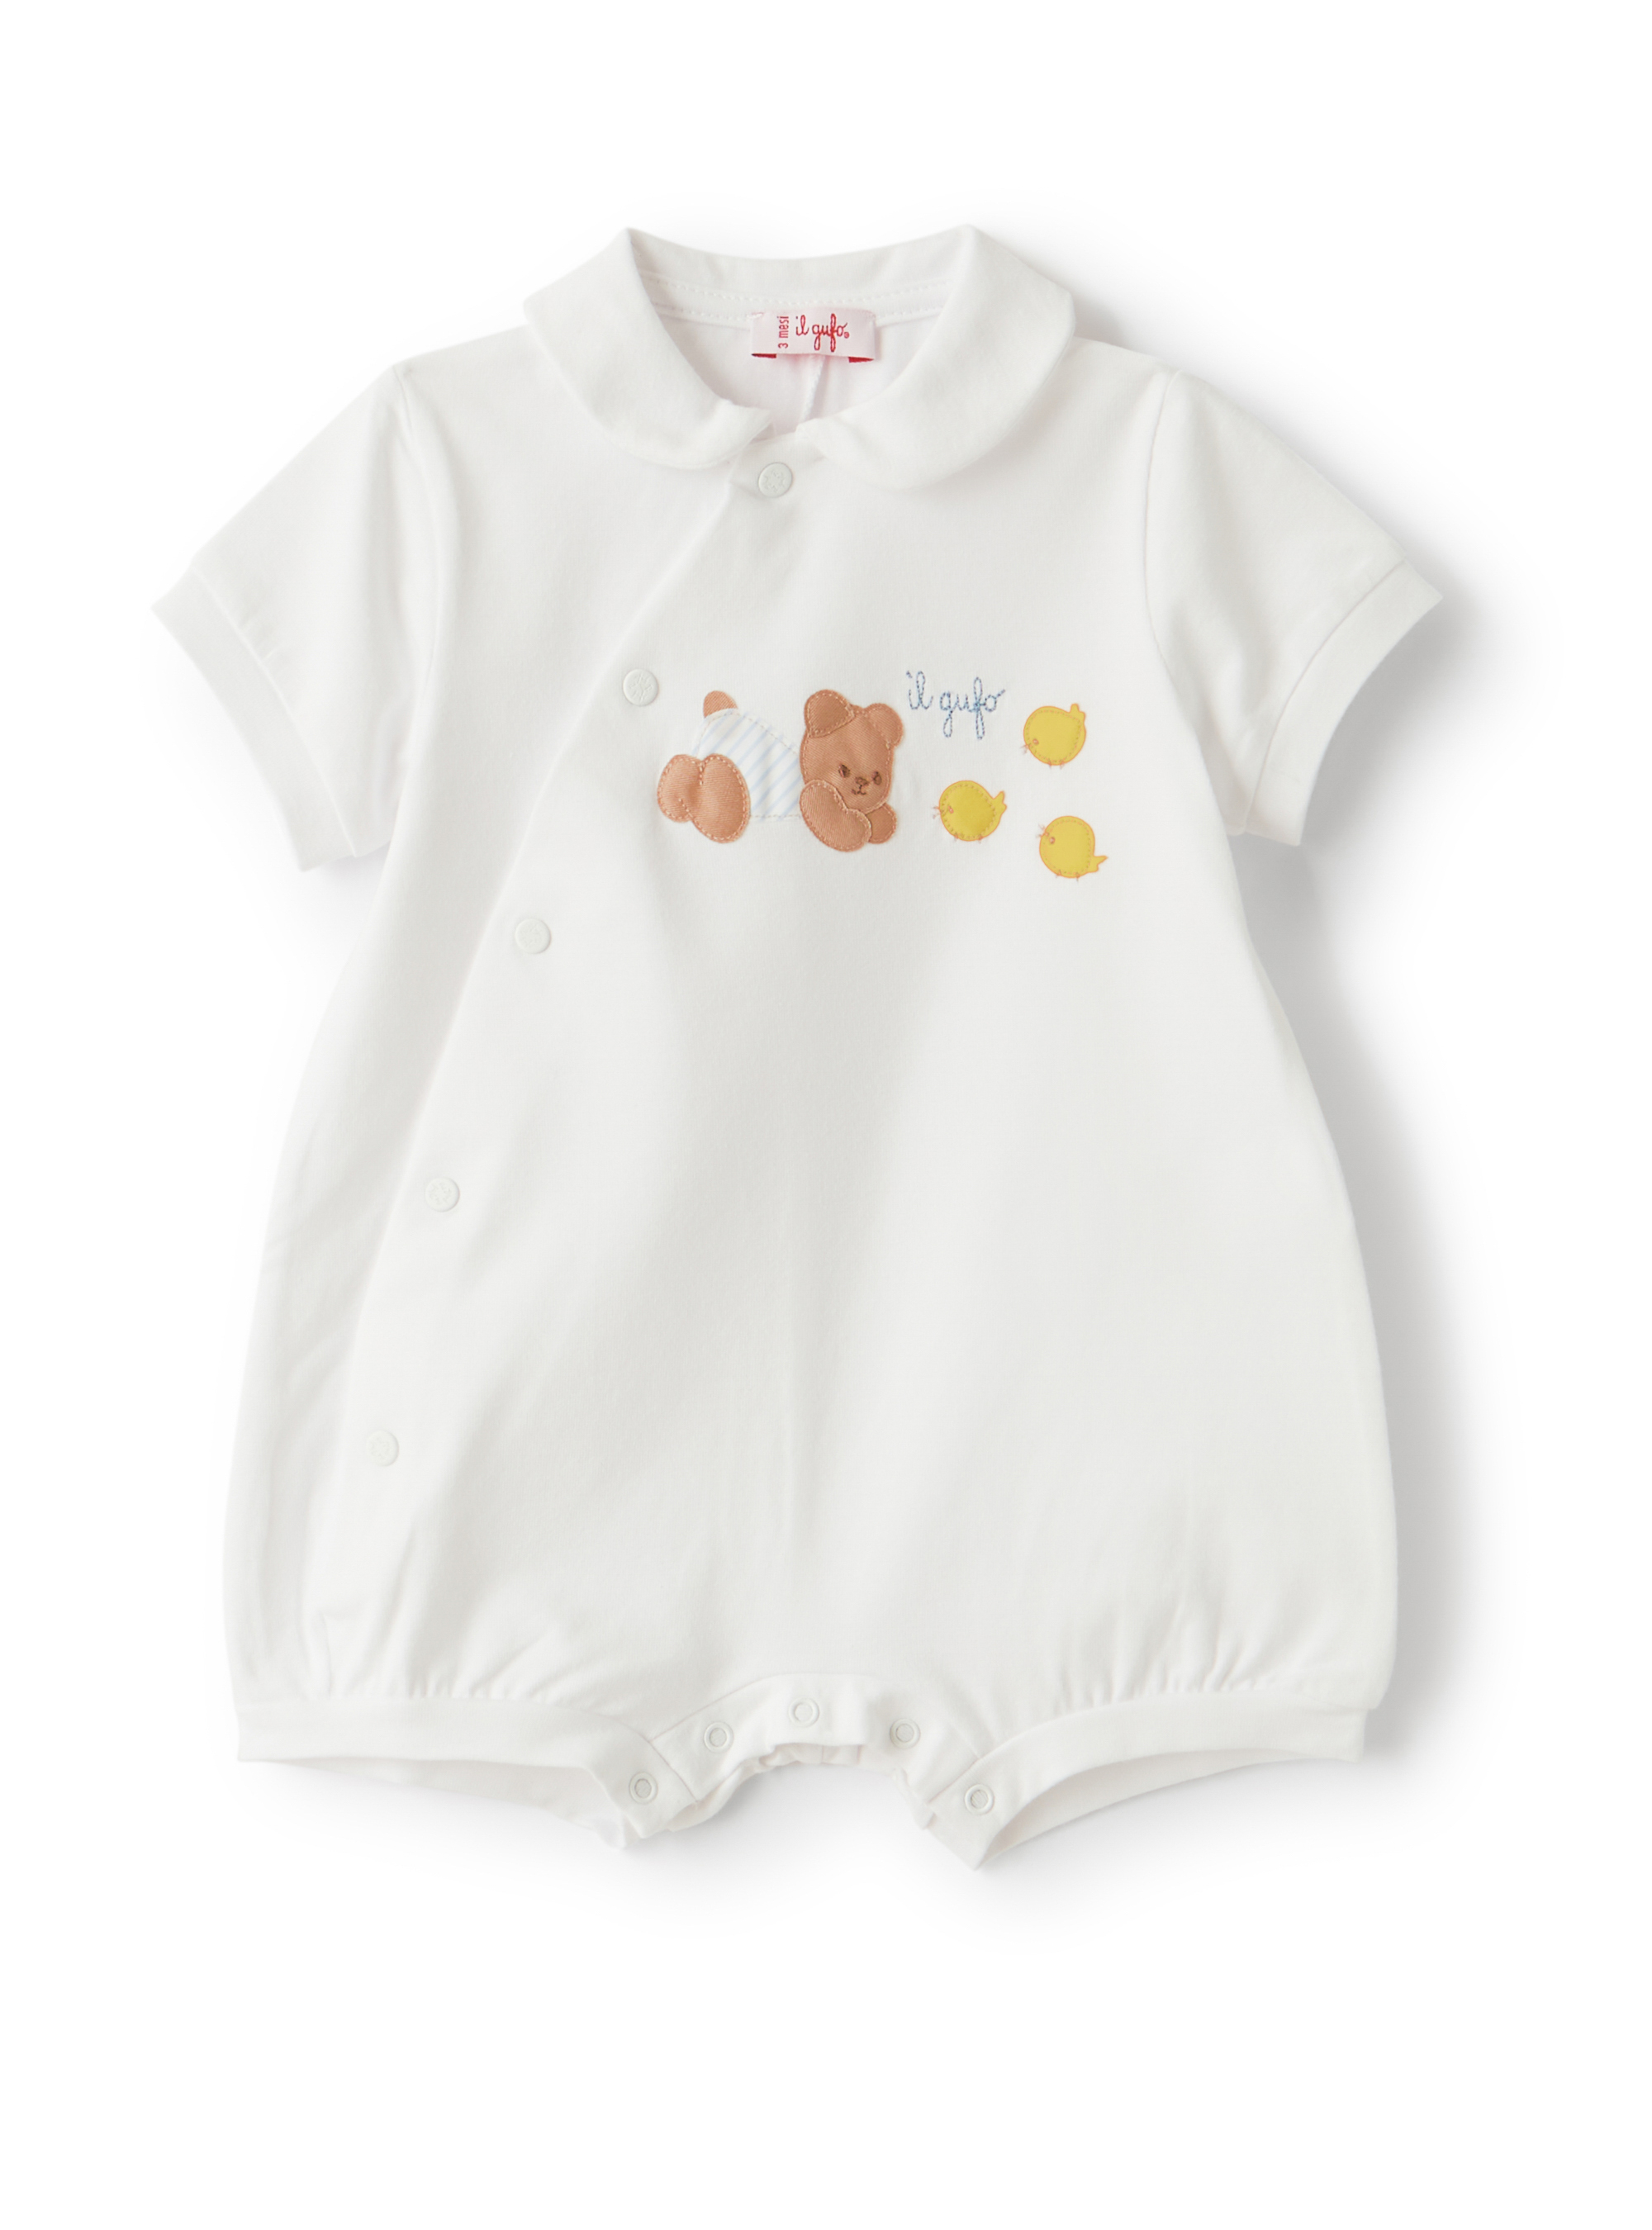 White romper with bear application - Babygrows - Il Gufo